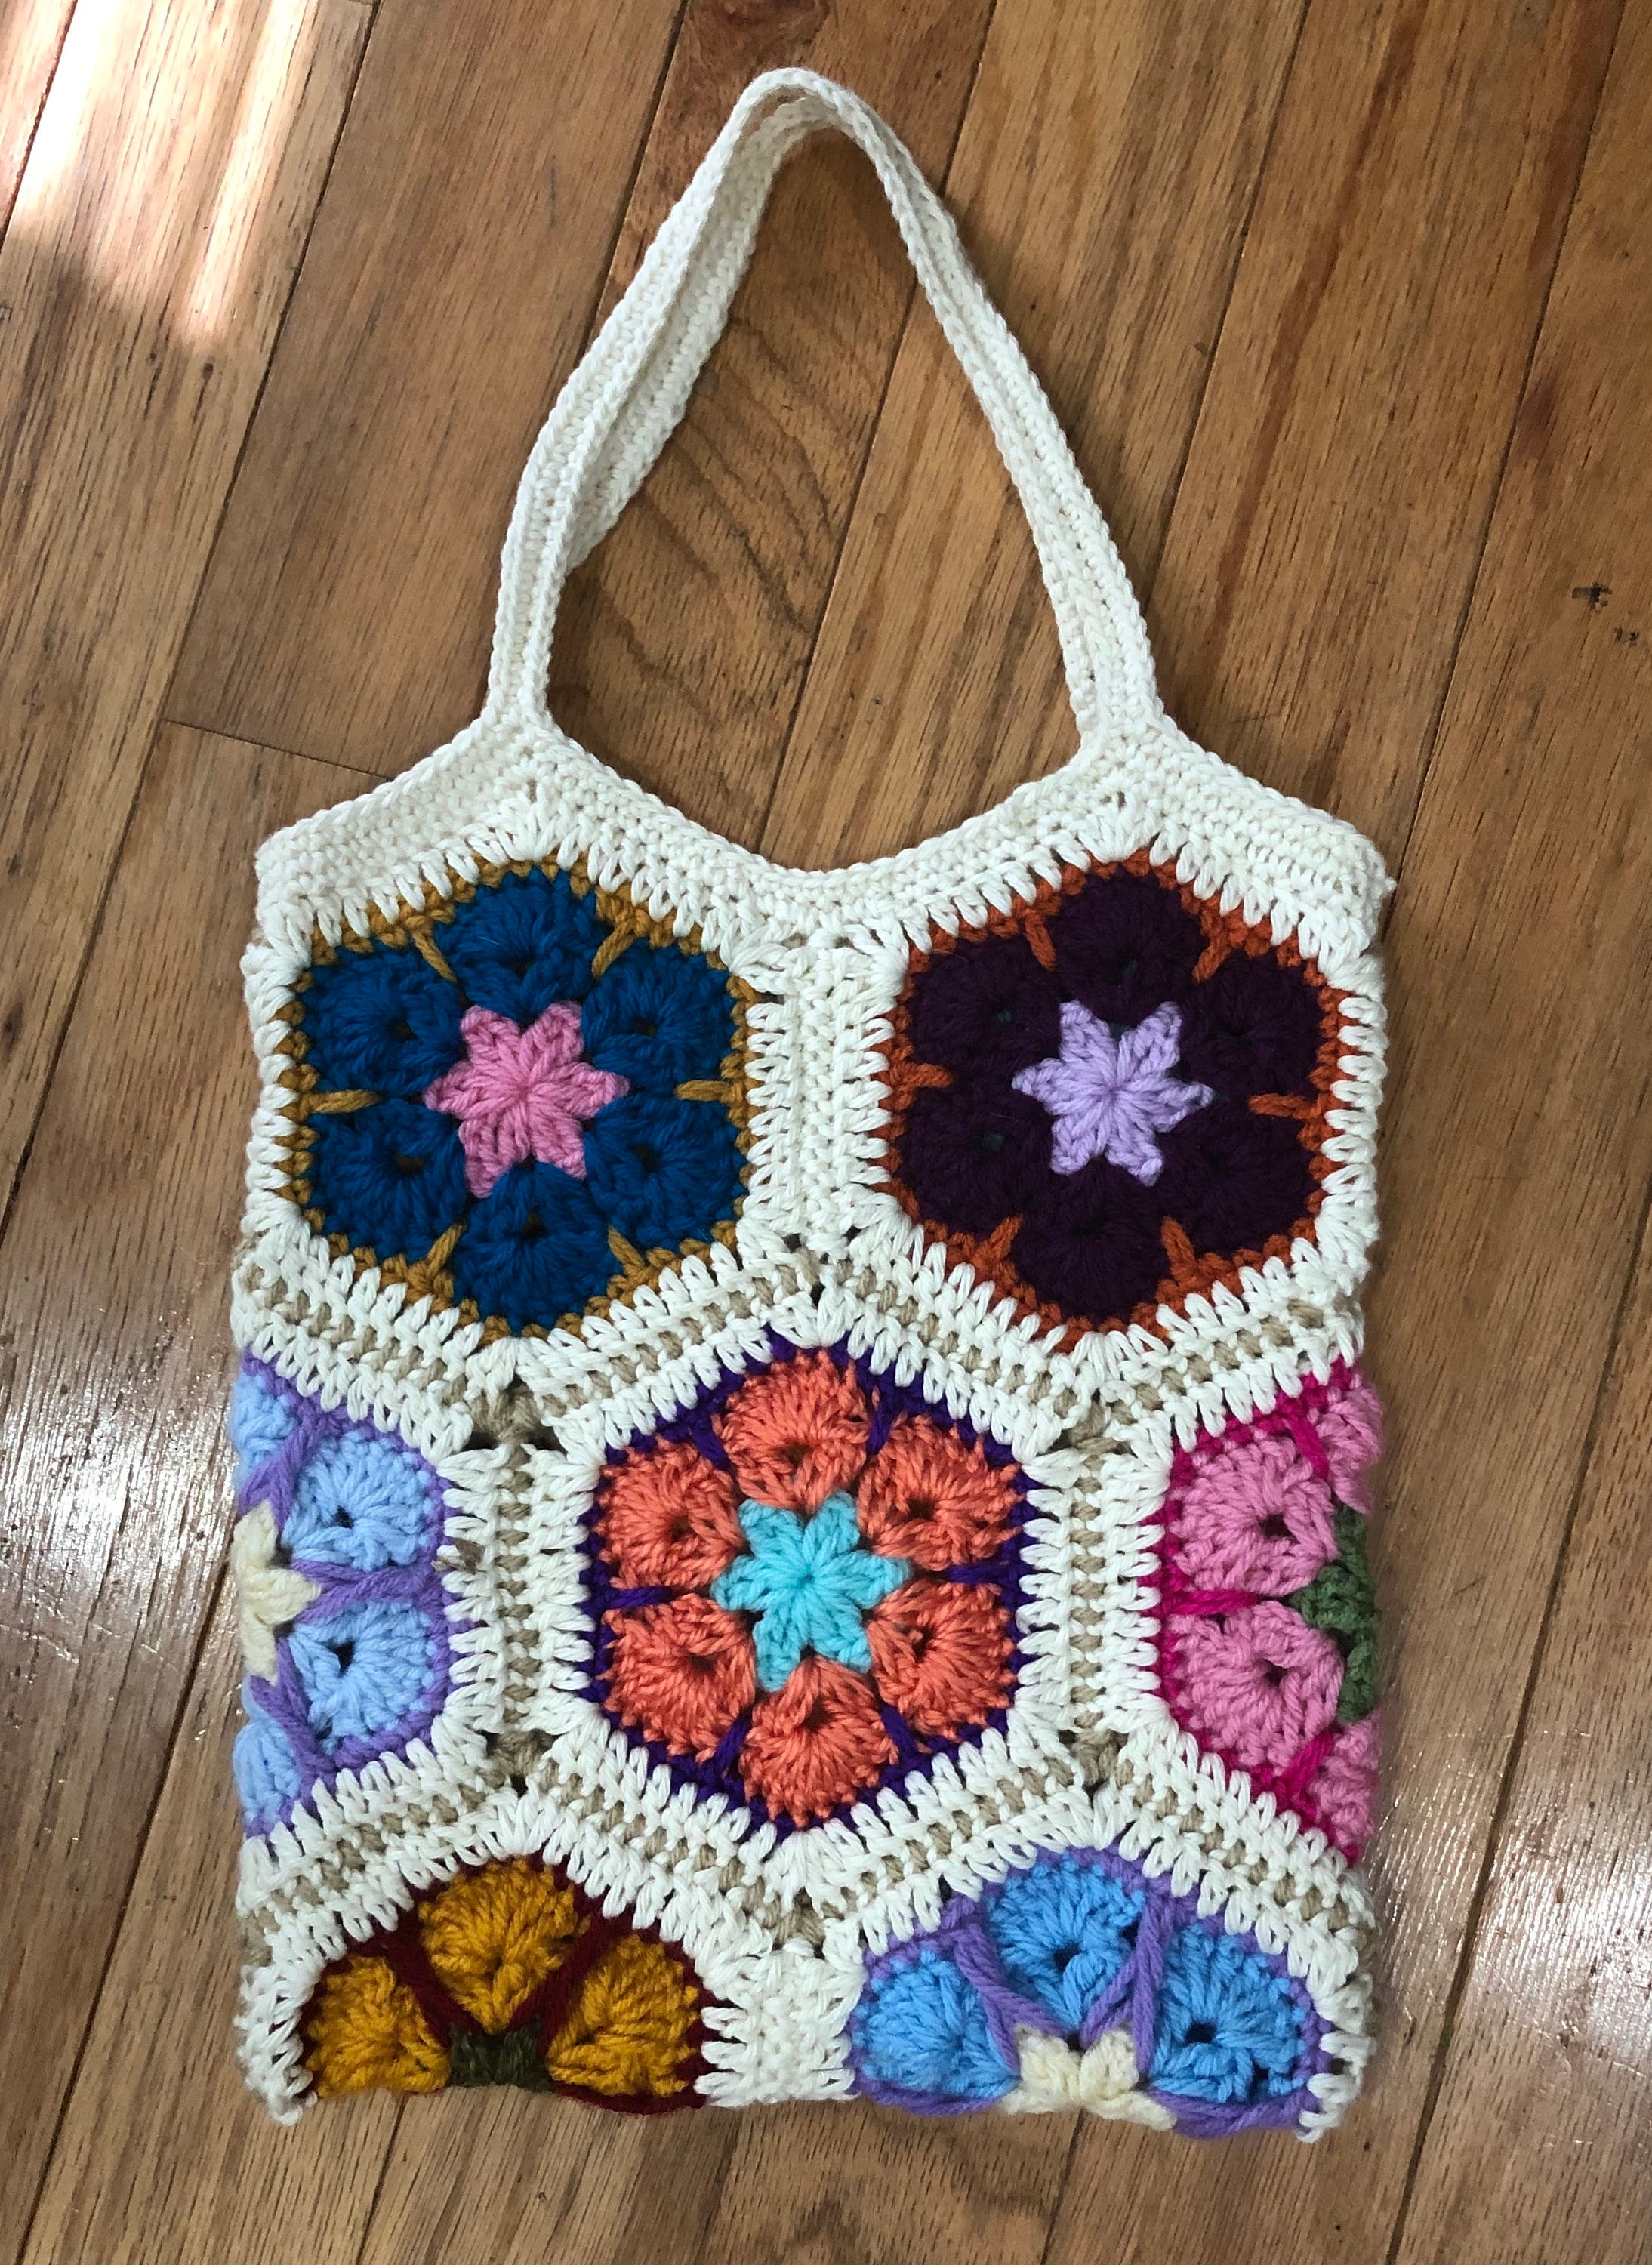 Finished this African flower purse for a friend! No pattern used. : r/ crochet